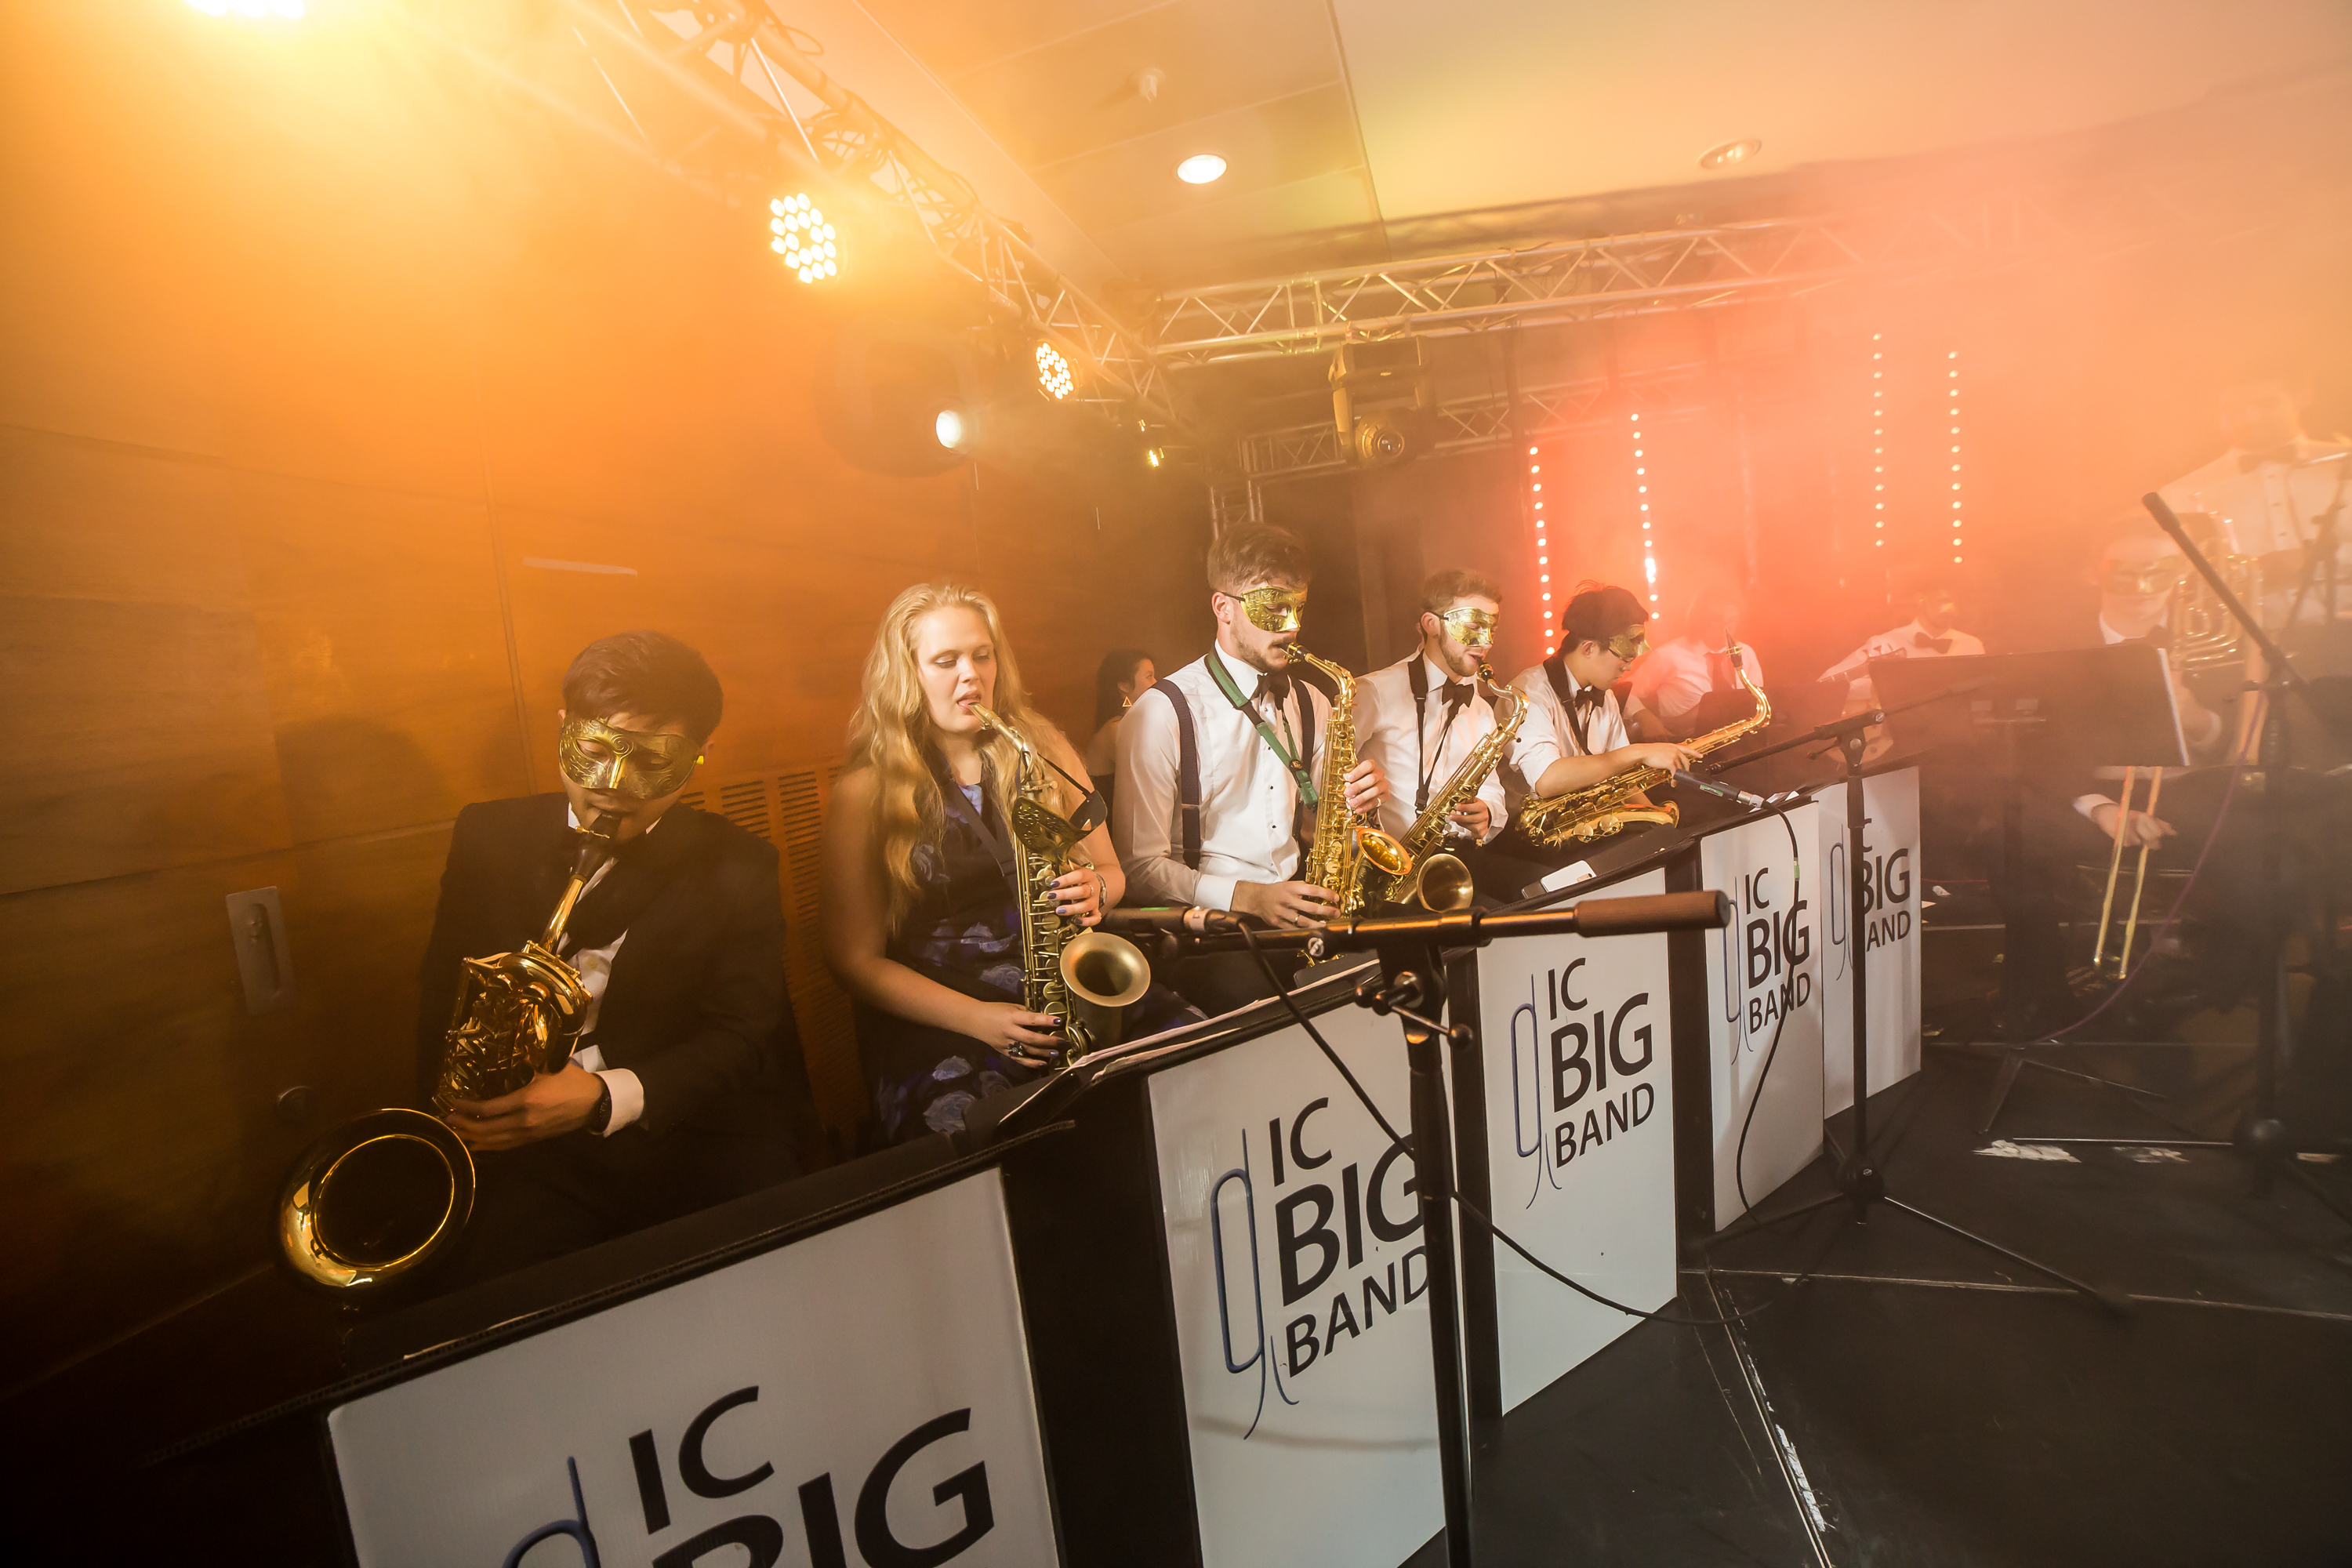 Big band saxophonists performing while wearing gold masks.